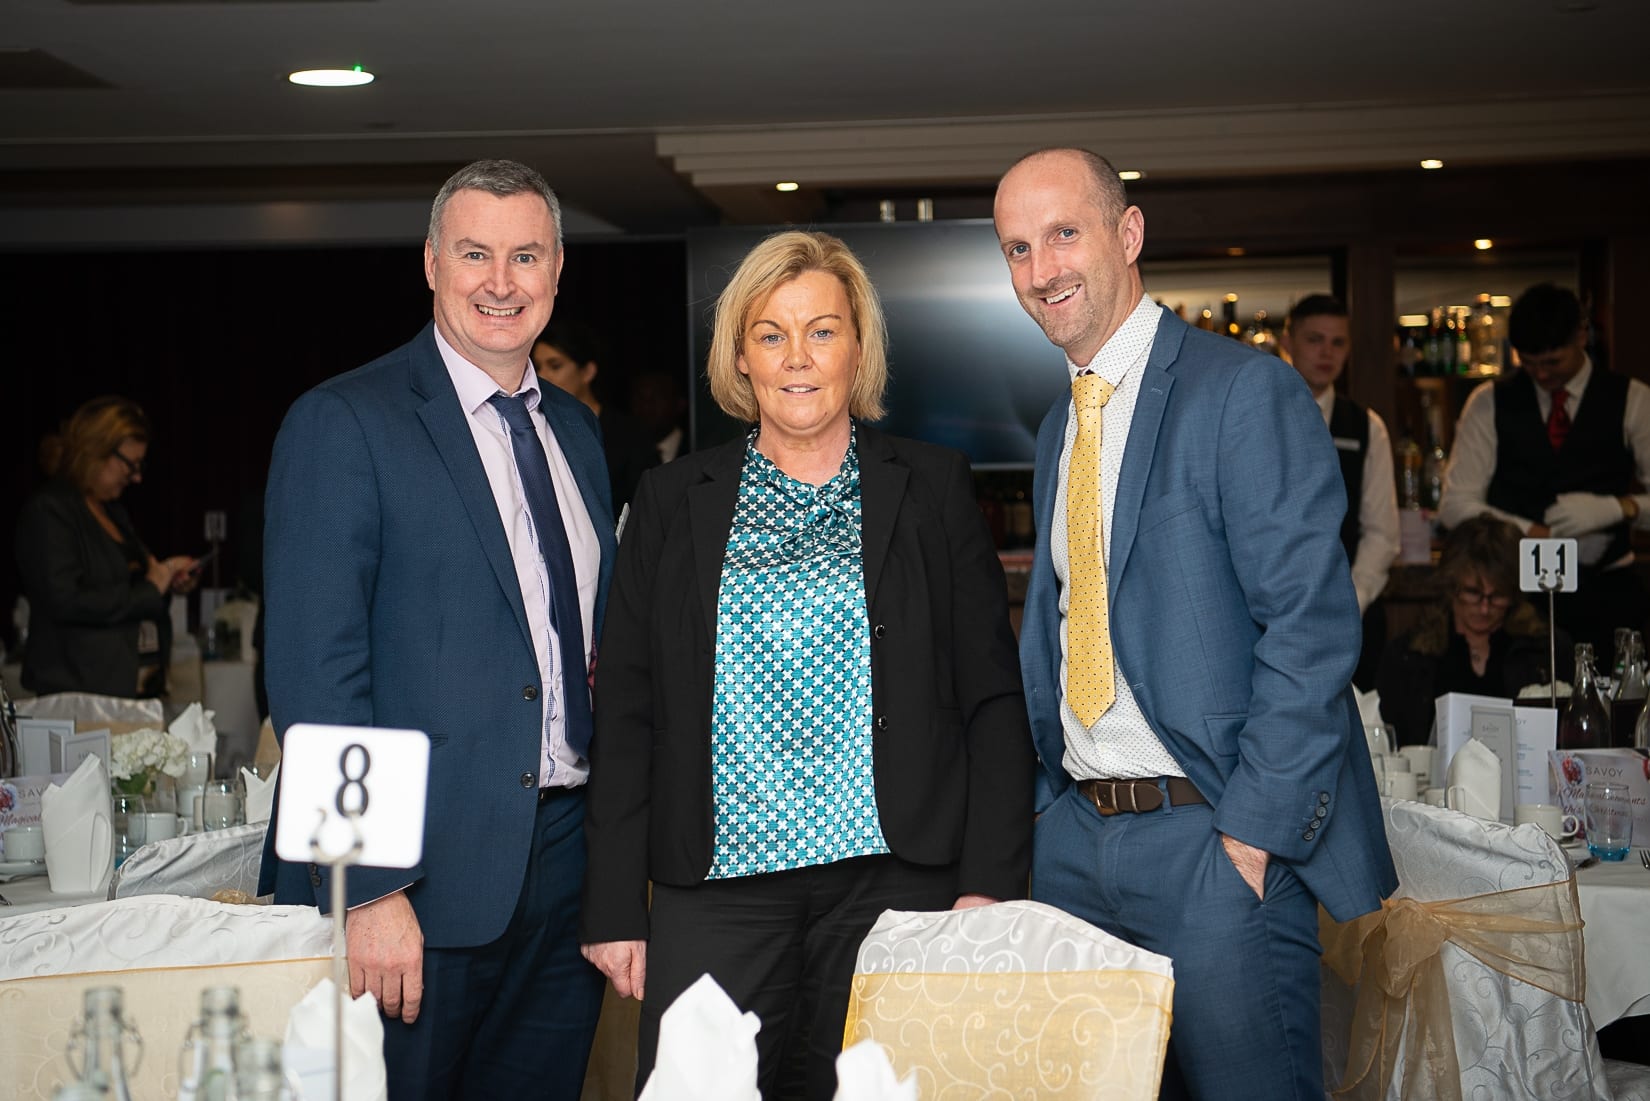 No repro fee-Limerick Chamber Autumn Luncheon which was held in The Savoy Hotel on Monday 23rd September - From Left to Right: Brain Shanley, Monica Mullins and Cian McInerney all from Ulster Bank 
Photo credit Shauna Kennedy